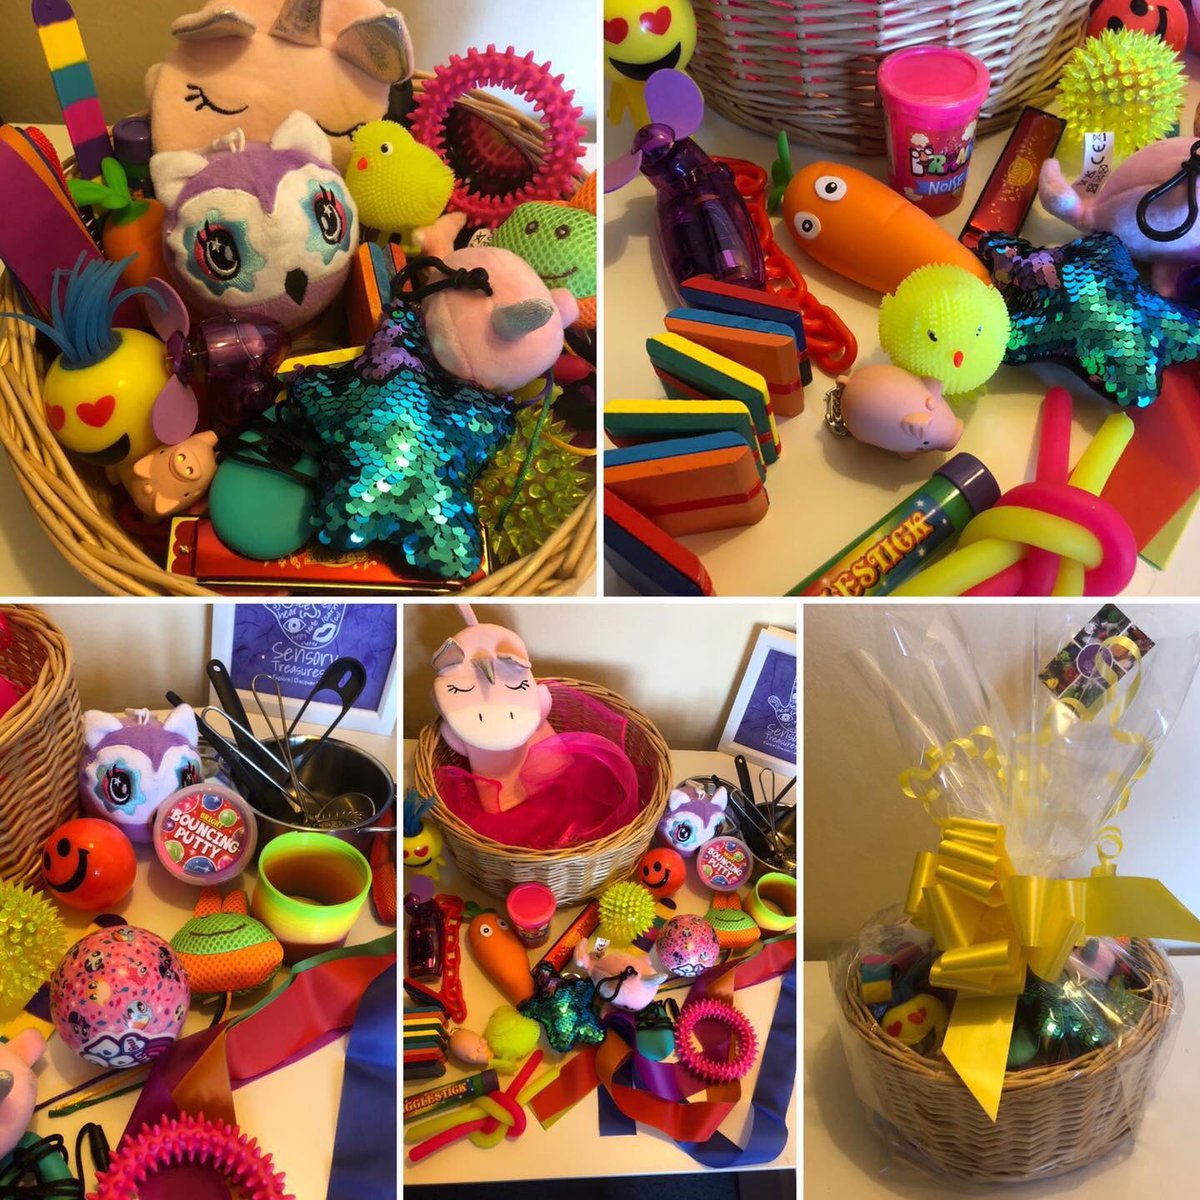 Imagine a gift wrapped basket for Easter 🐣 

Made up to suit any age, interests, needs, occasions 

#easter #easterbaskets #eastergiftideas #fidgettoys #fidgets #sensoryplayideas #personalisedgifts #tailoredsuit #eastertime🐣 #asd #sen #fidgettoys #teens #autism #Queenof